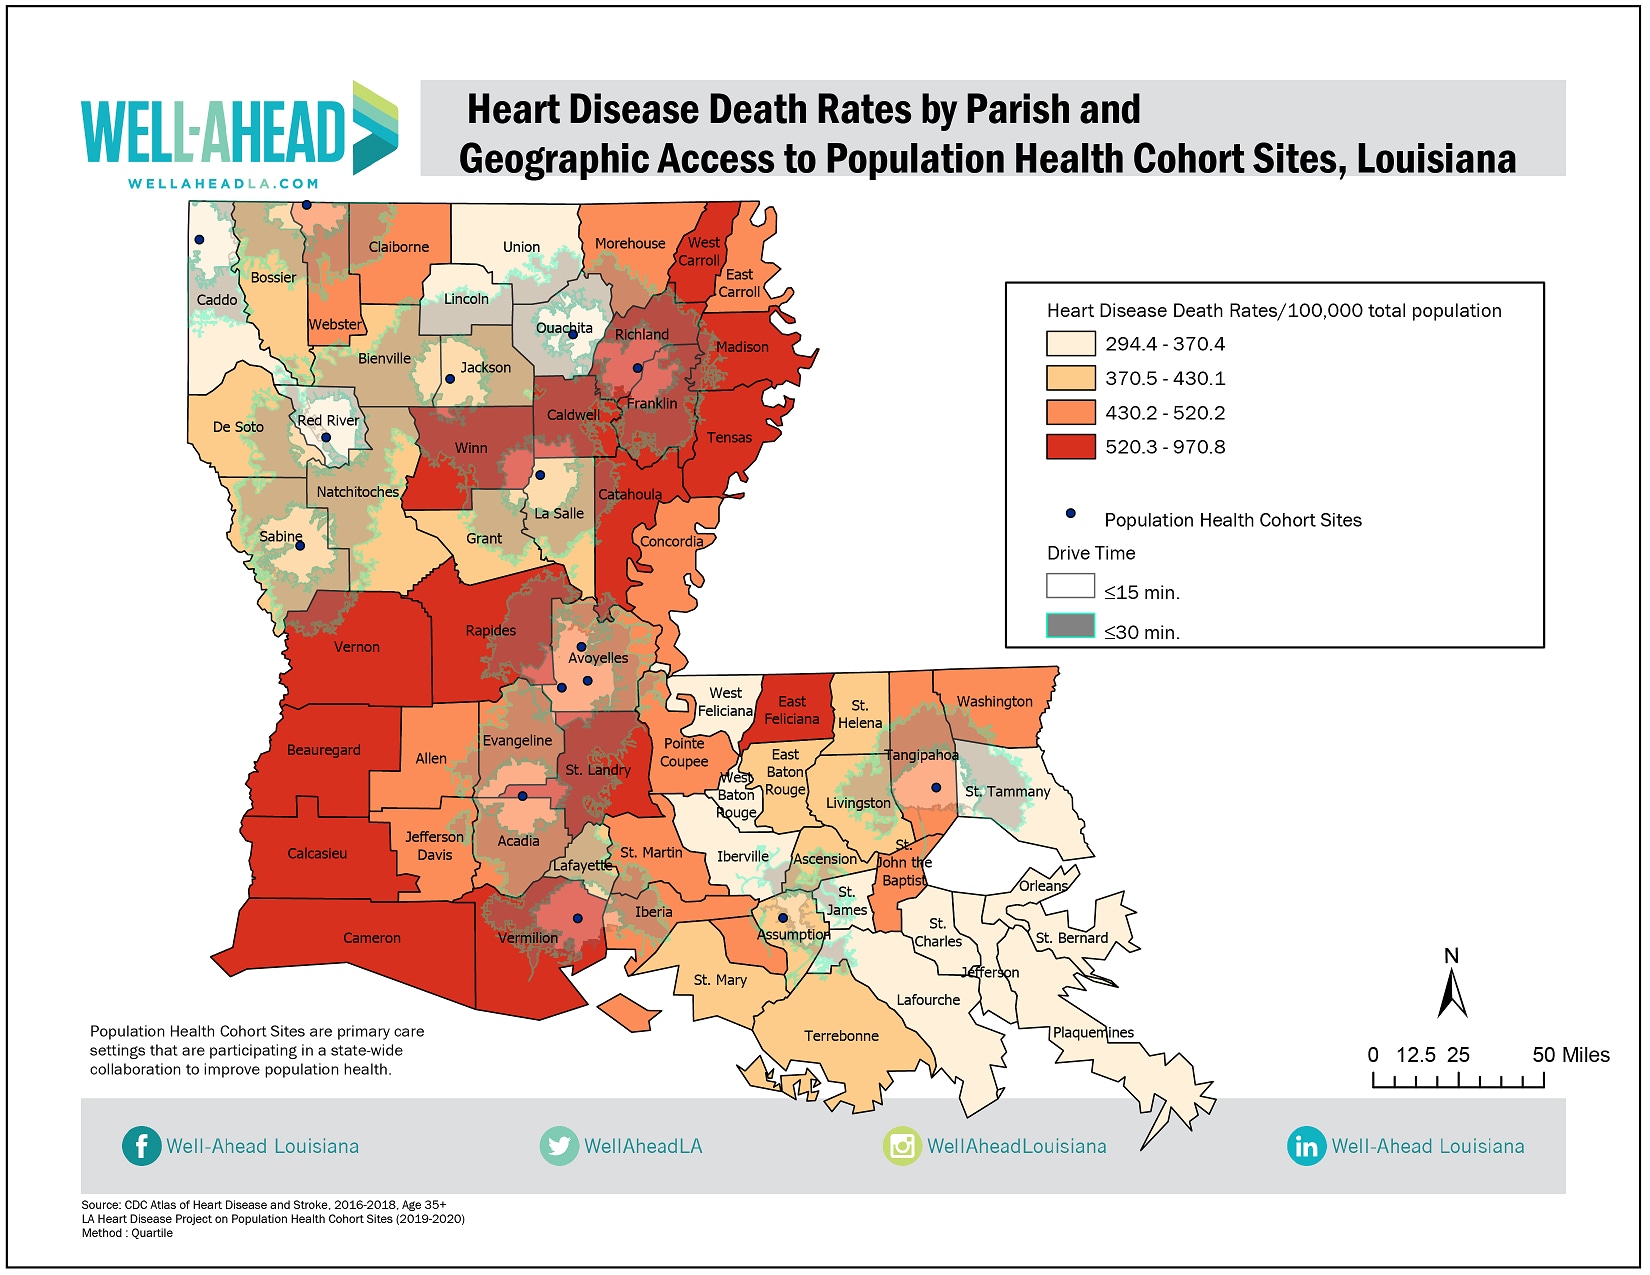 Heart Disease Death Rates by Parish and Geographic Access to Population Health Cohort Sites, Louisiana